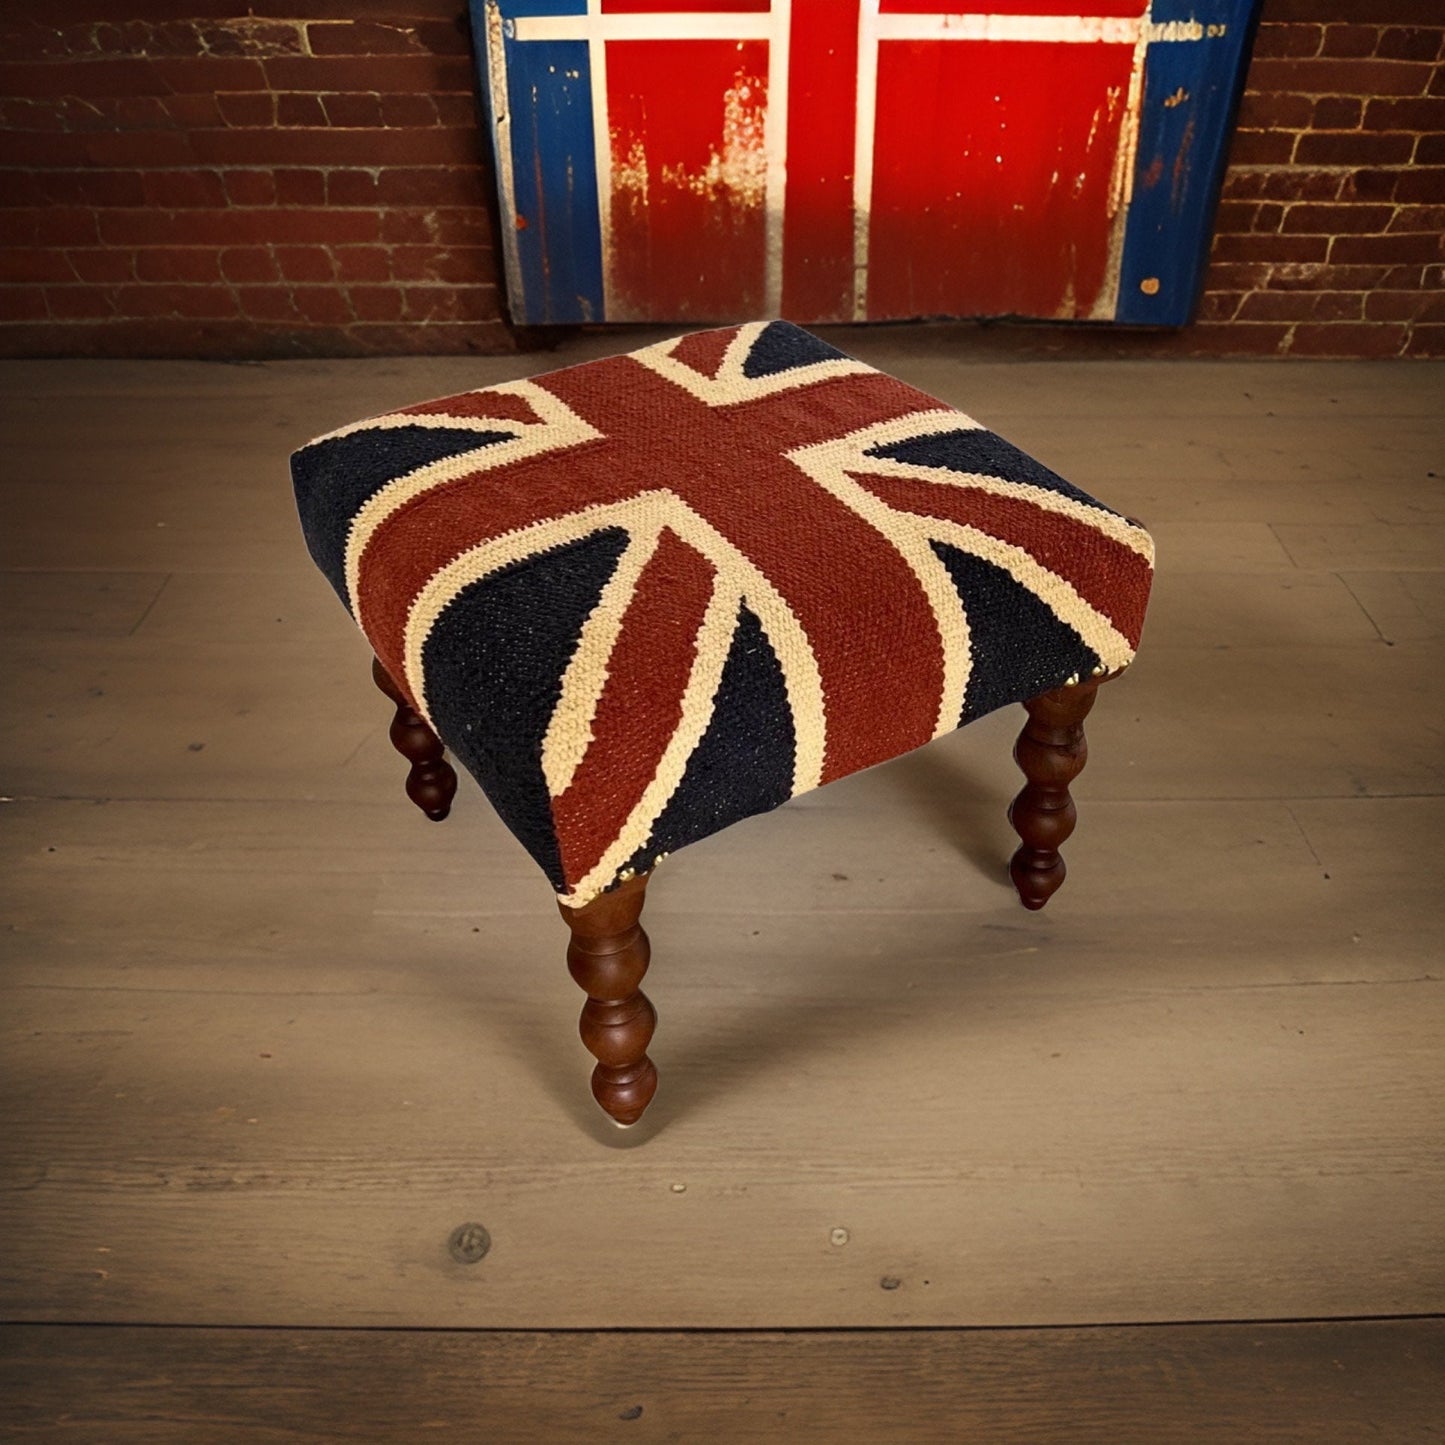 Maxlume ~ Union Jack Flag Bench | Great Britain | Pouf Solid Base | Vintage Style | Floor Standing | Man Cave Stool